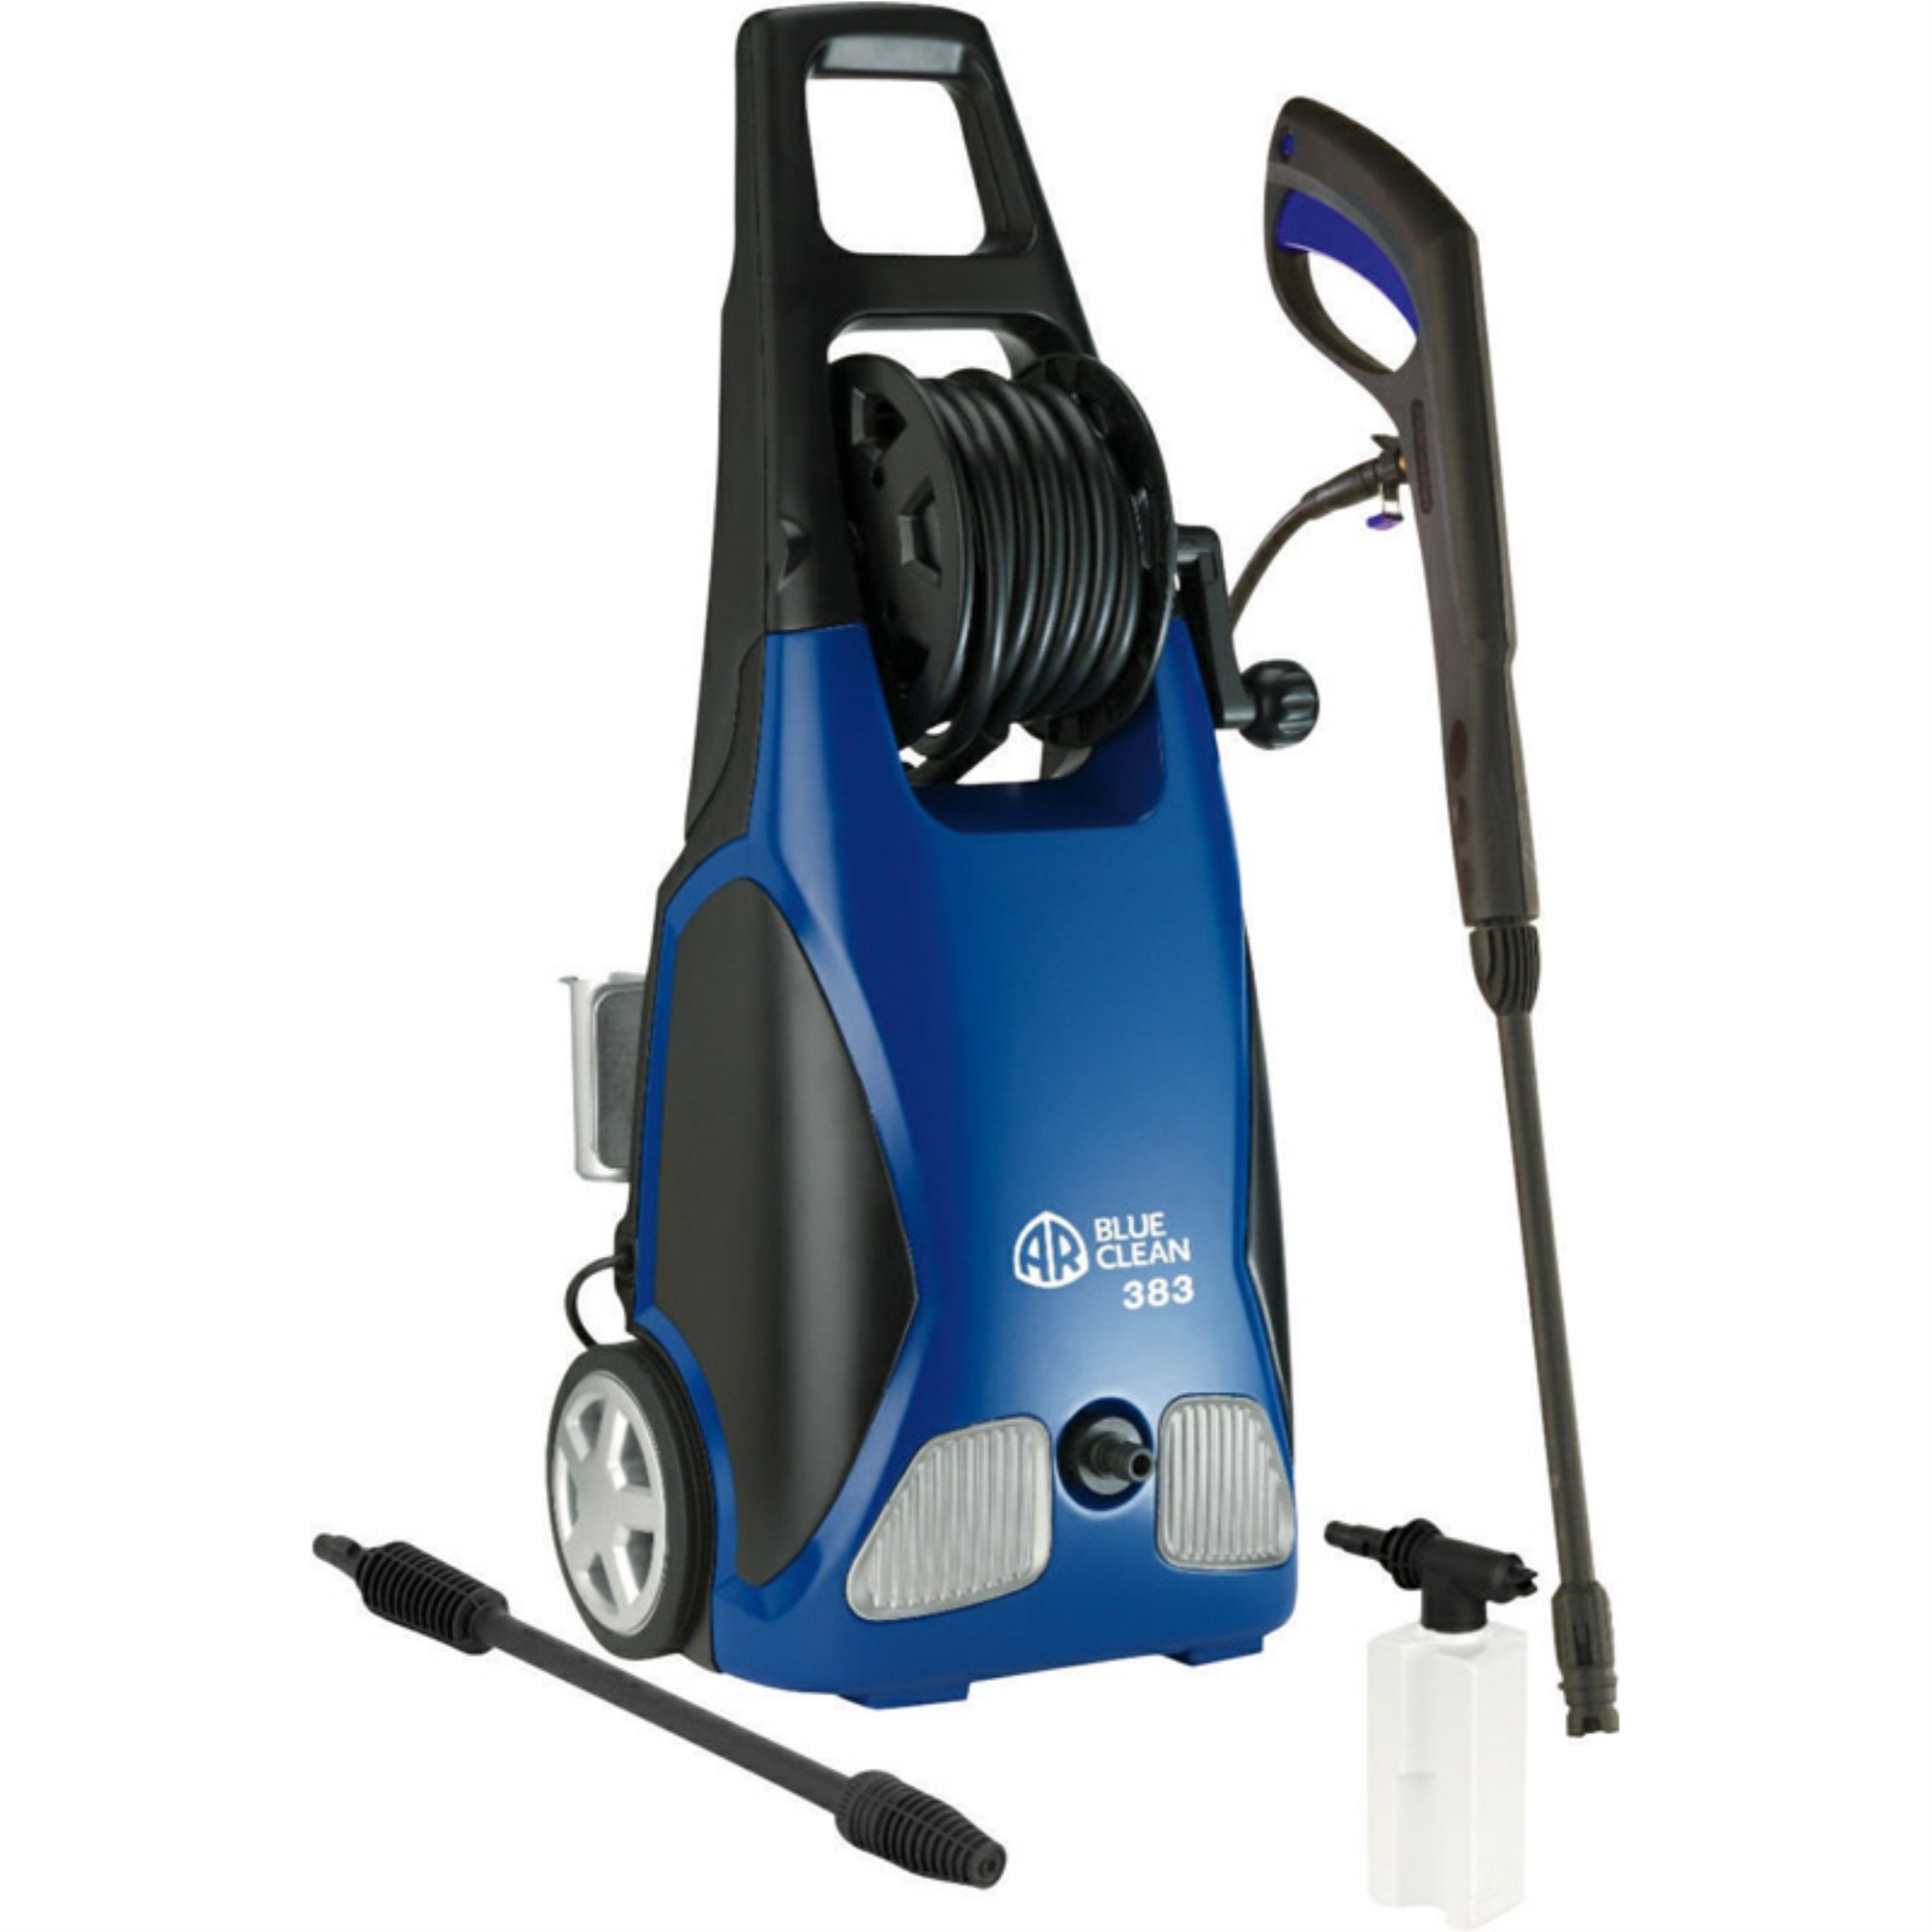 A.R. Blue Clean Pressure Washer,1.8HP,1900psi,120V  AR383 - image 1 of 7